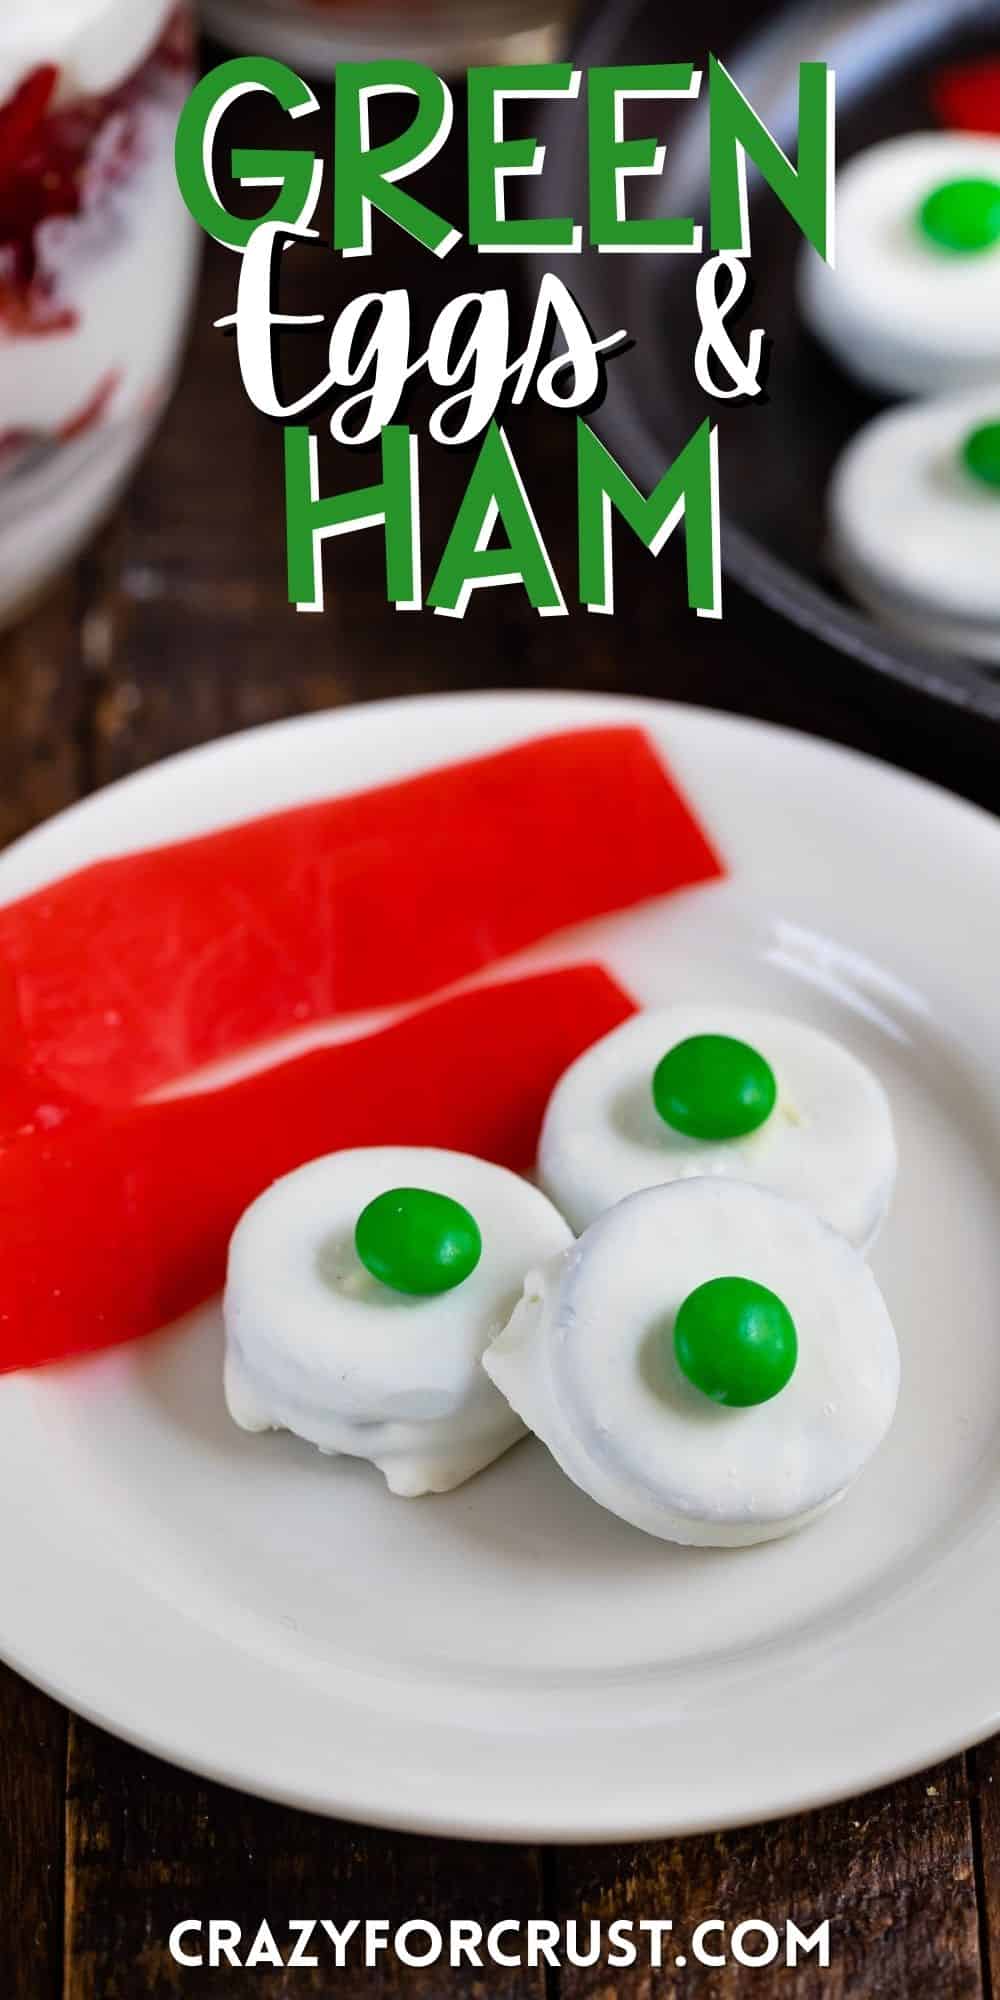 green eggs and ham made from various candies on a white plate with words on the image.